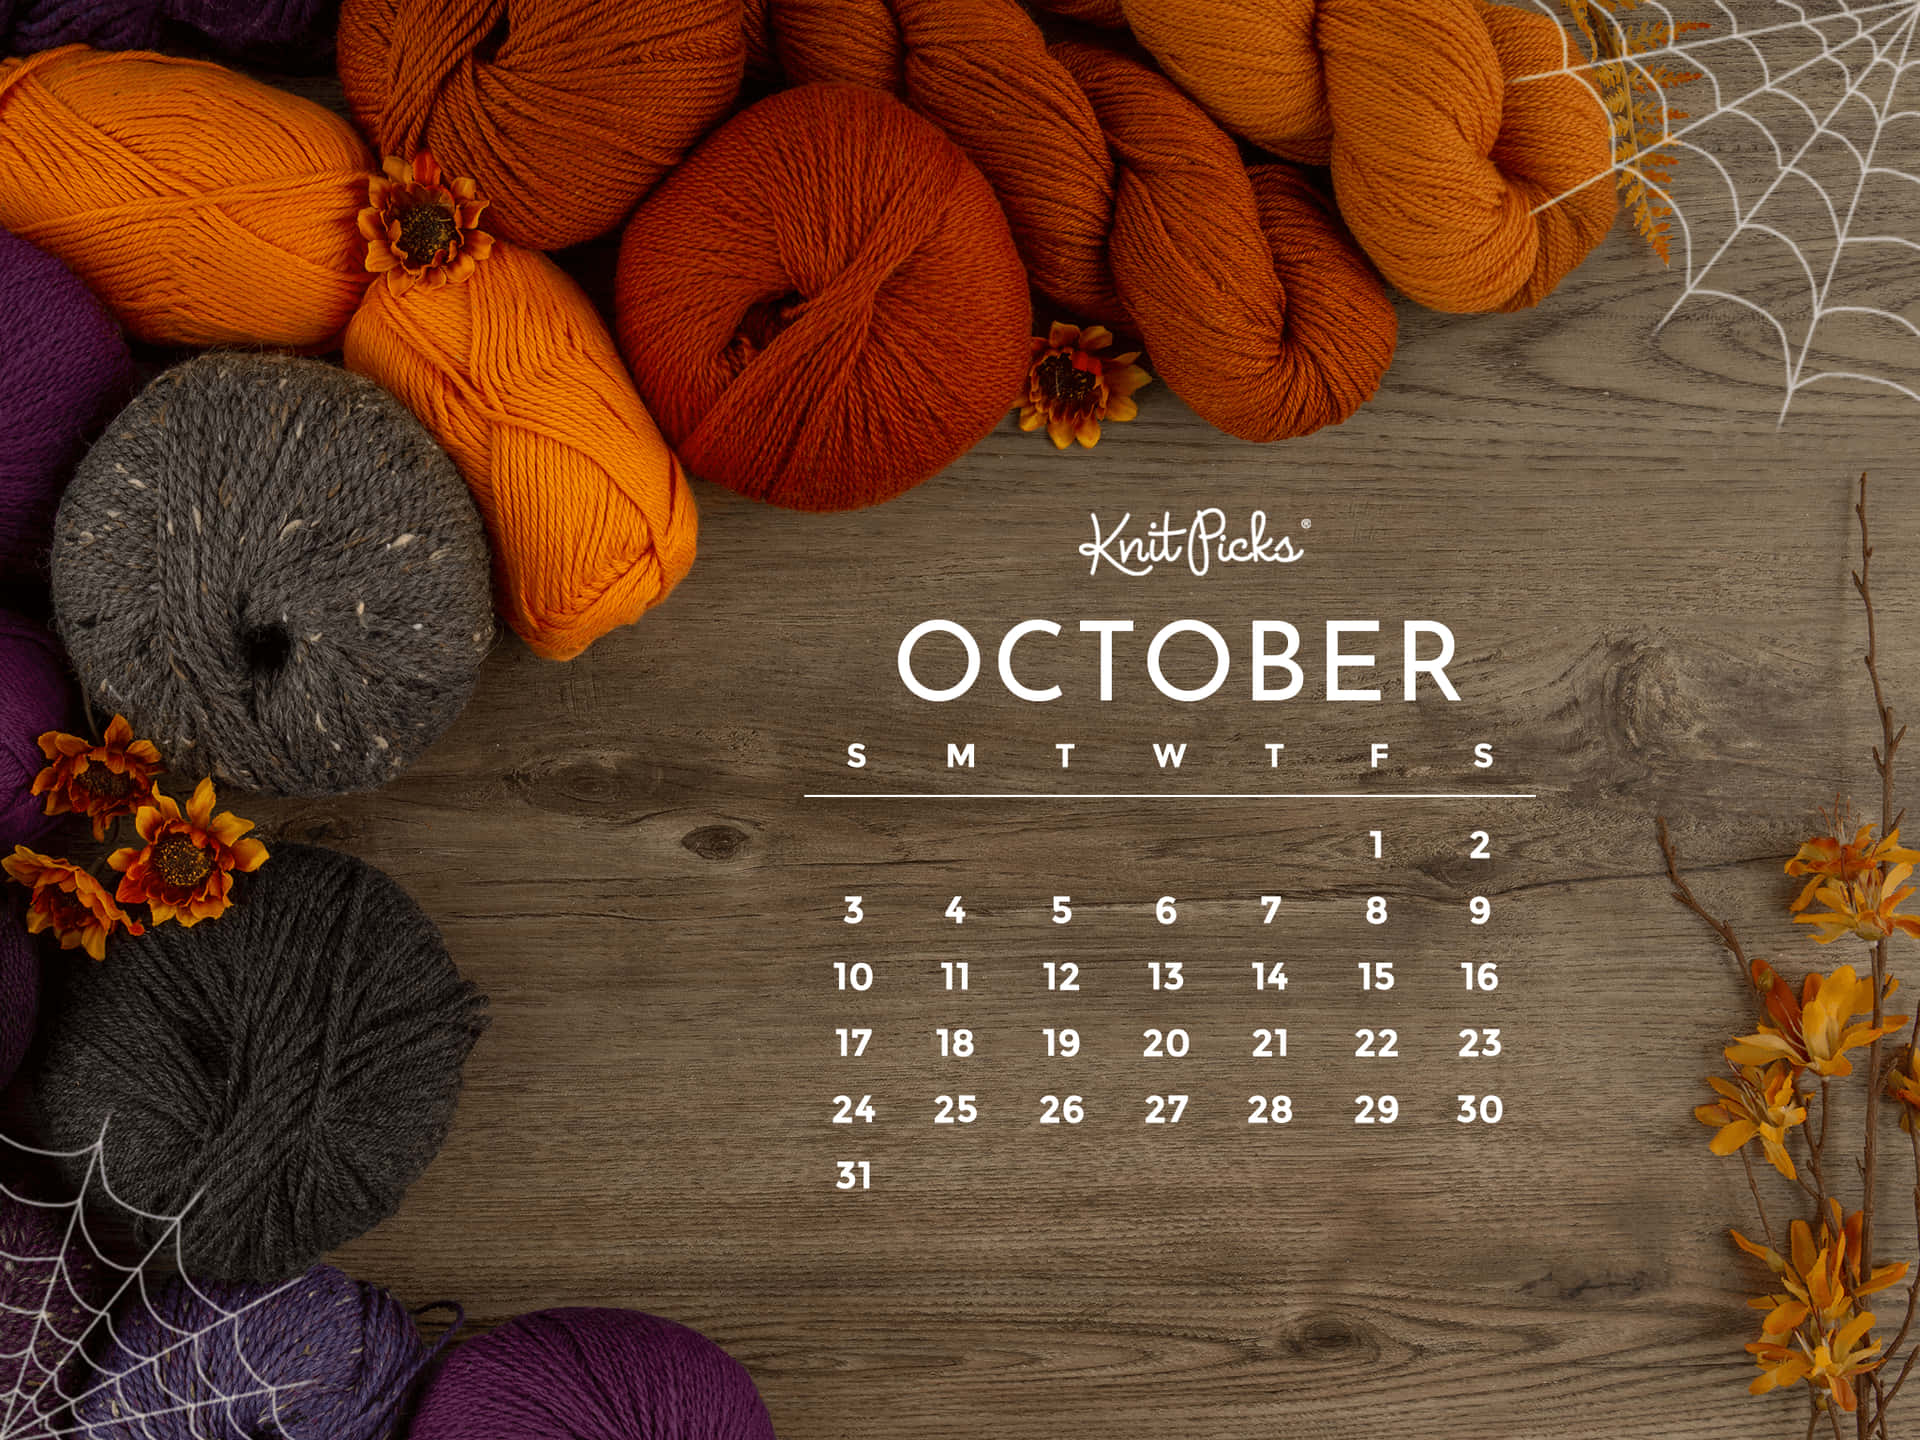 October Calendar With Yarn And Spiders Wallpaper